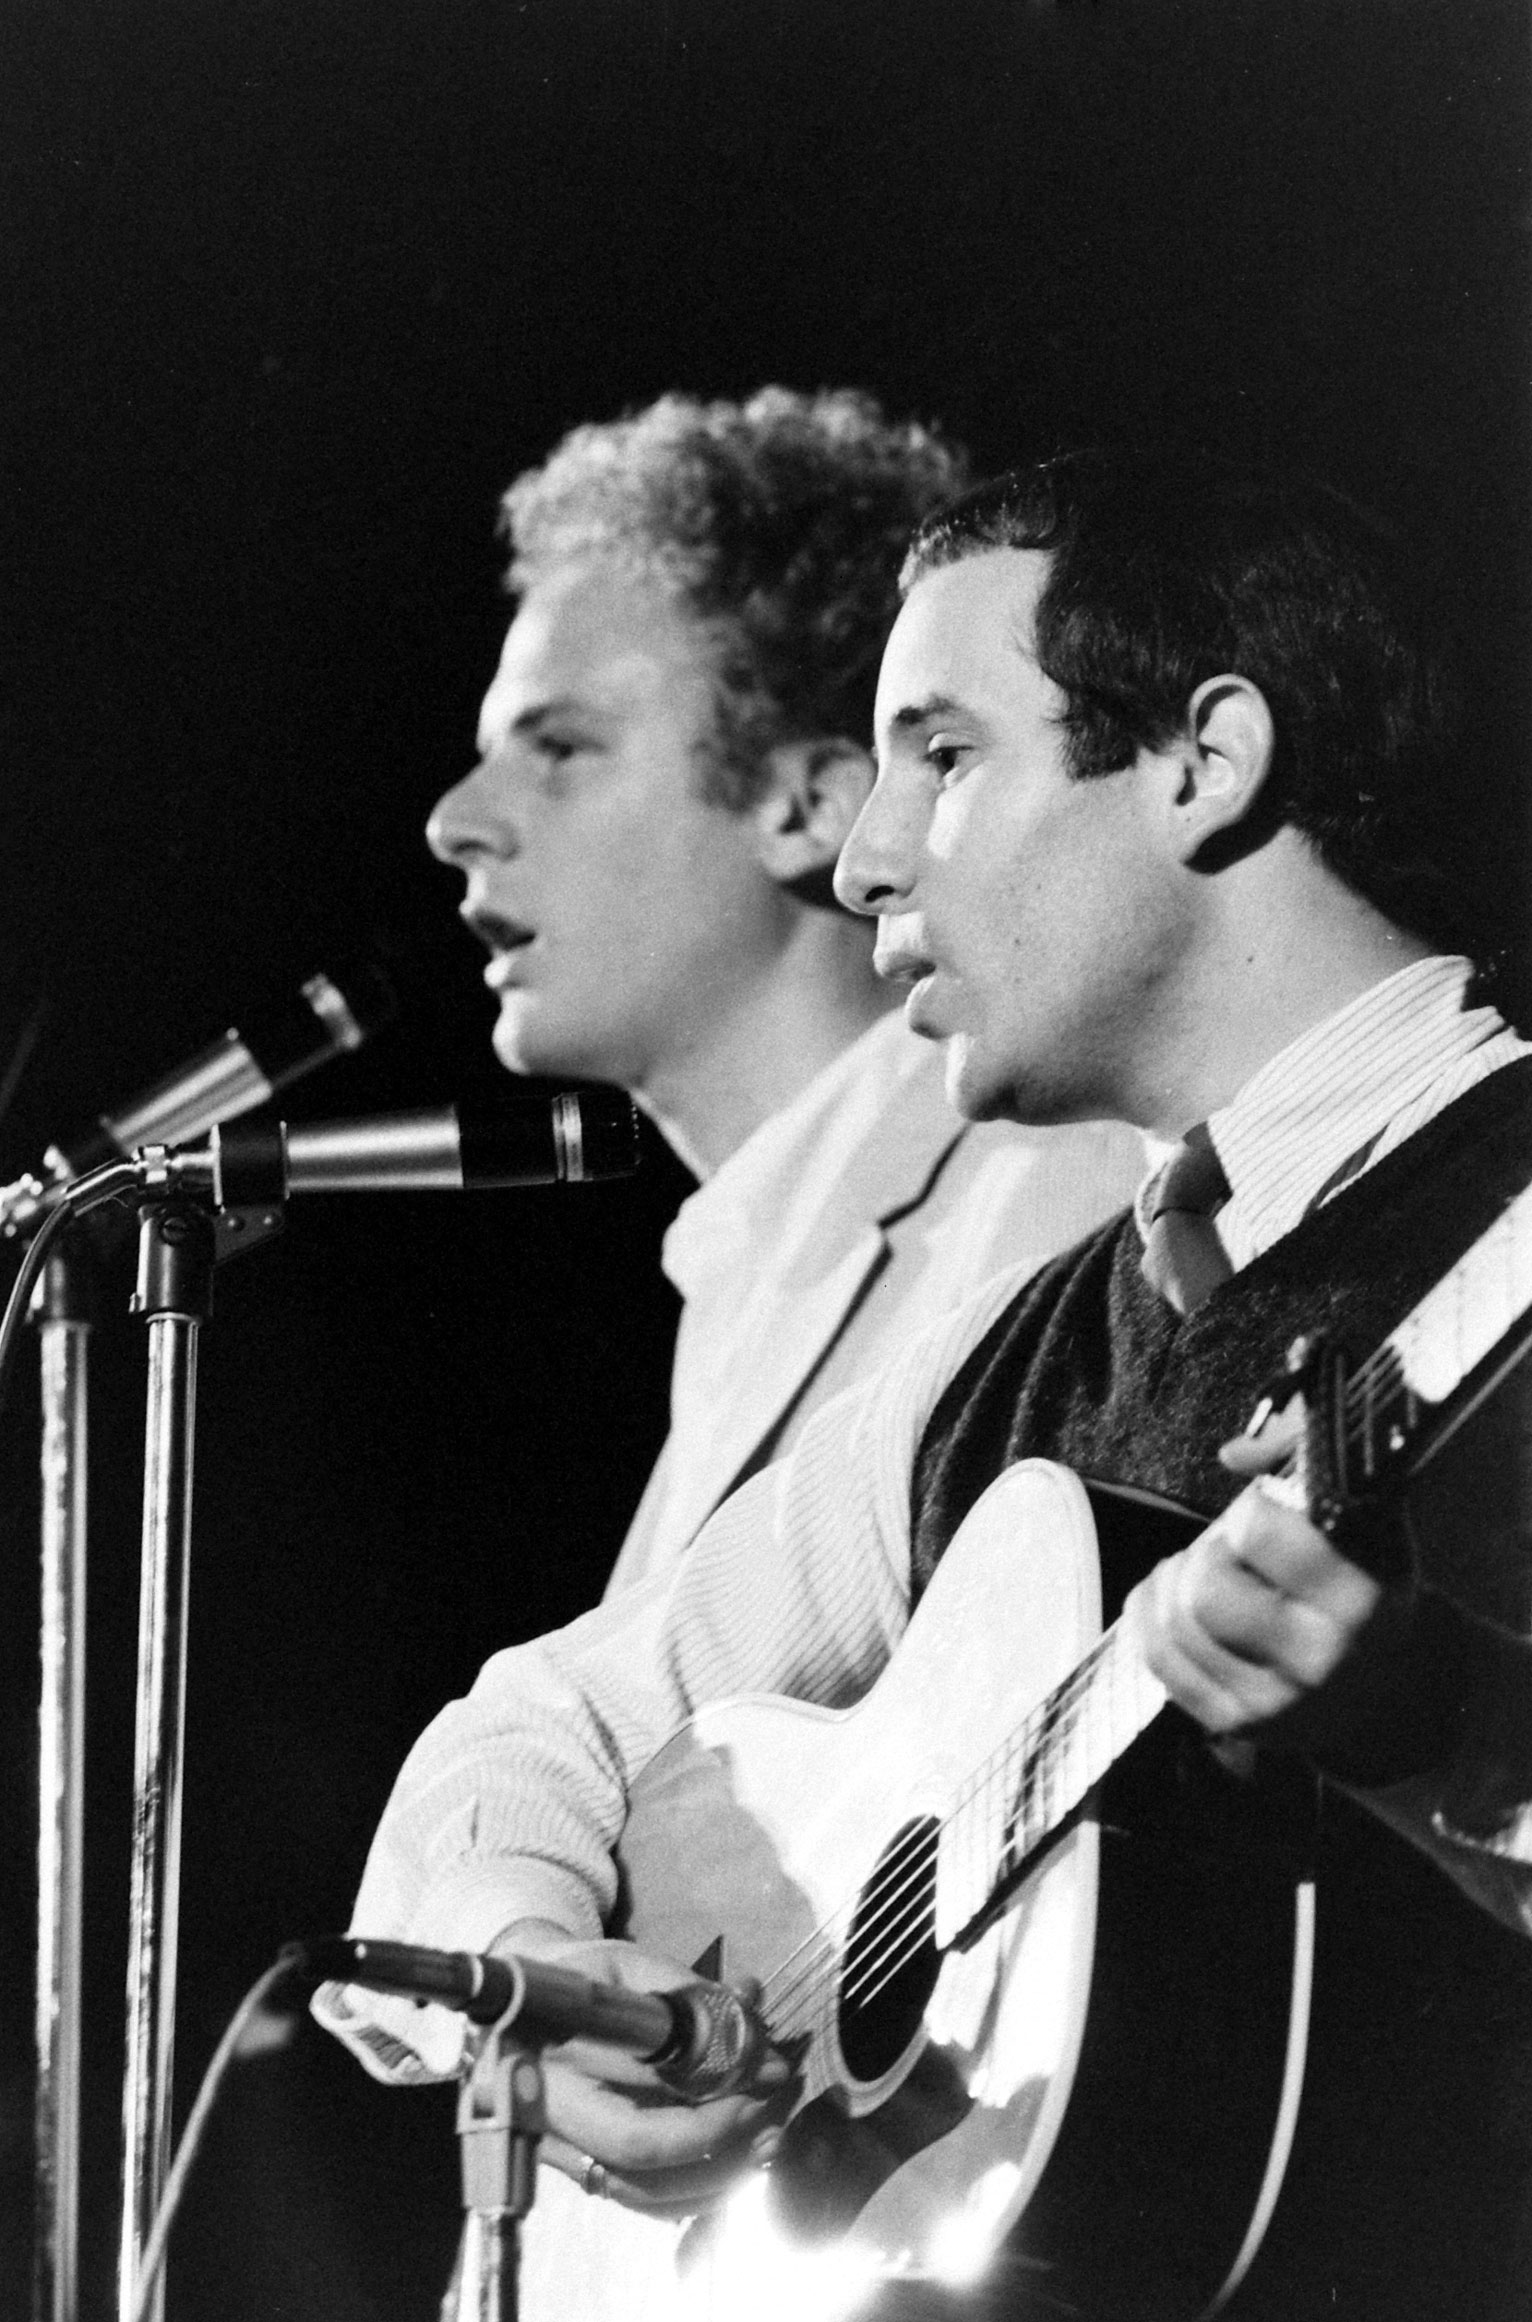 Simon and Garfunkel have collected nine Grammys and a Lifetime Achievement Award. Pictured here performing in Philadelphia, 1968. (Charles Phillips—The LIFE Picture Collection/Getty Images)